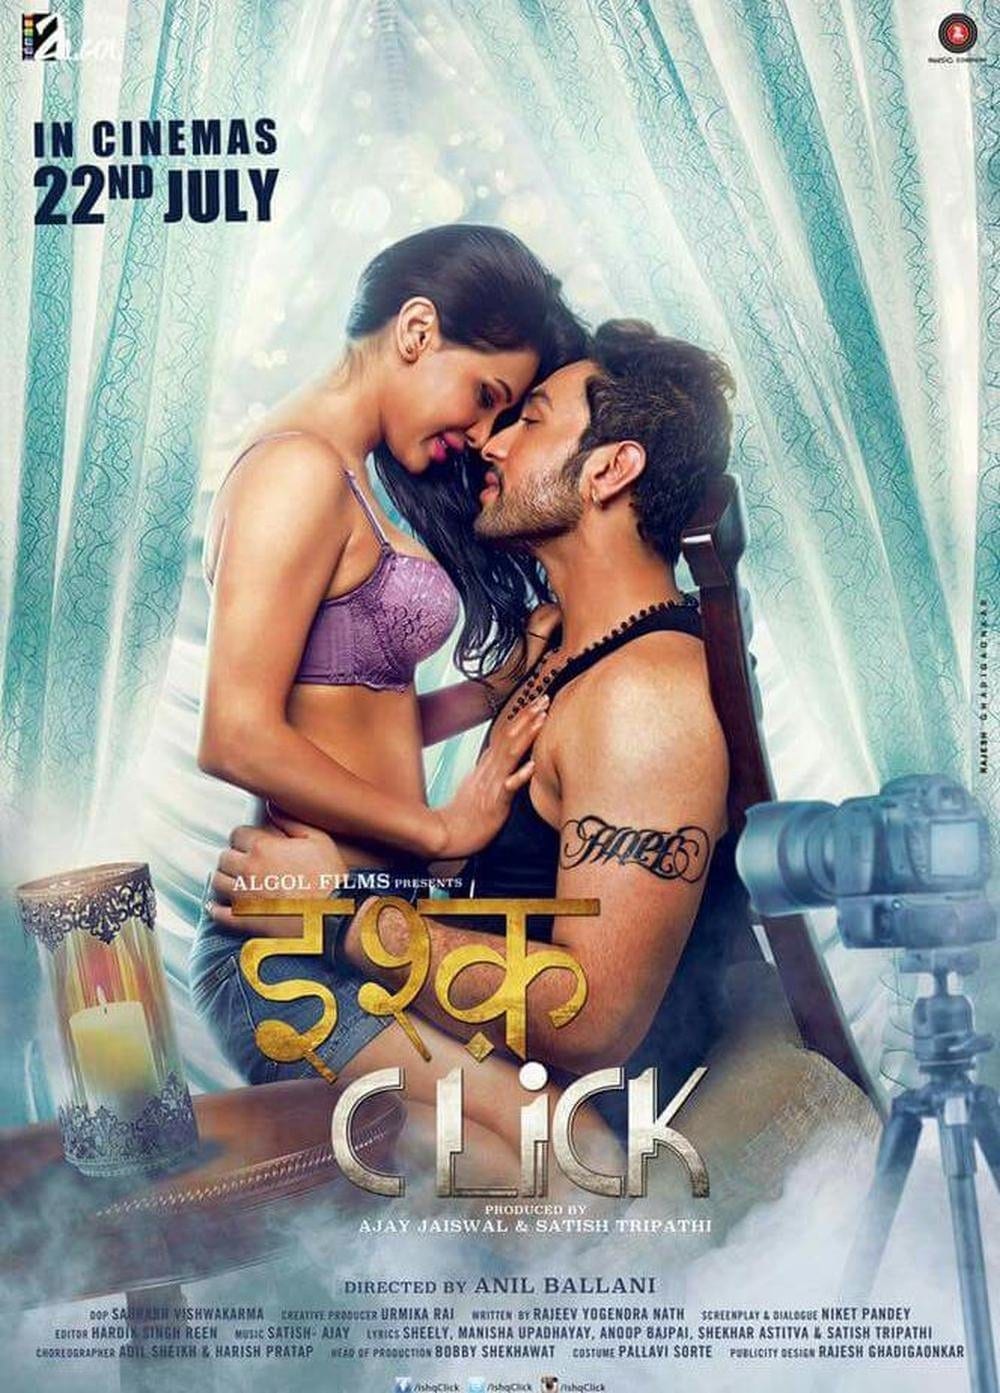 Poster for the movie "Ishq Click"